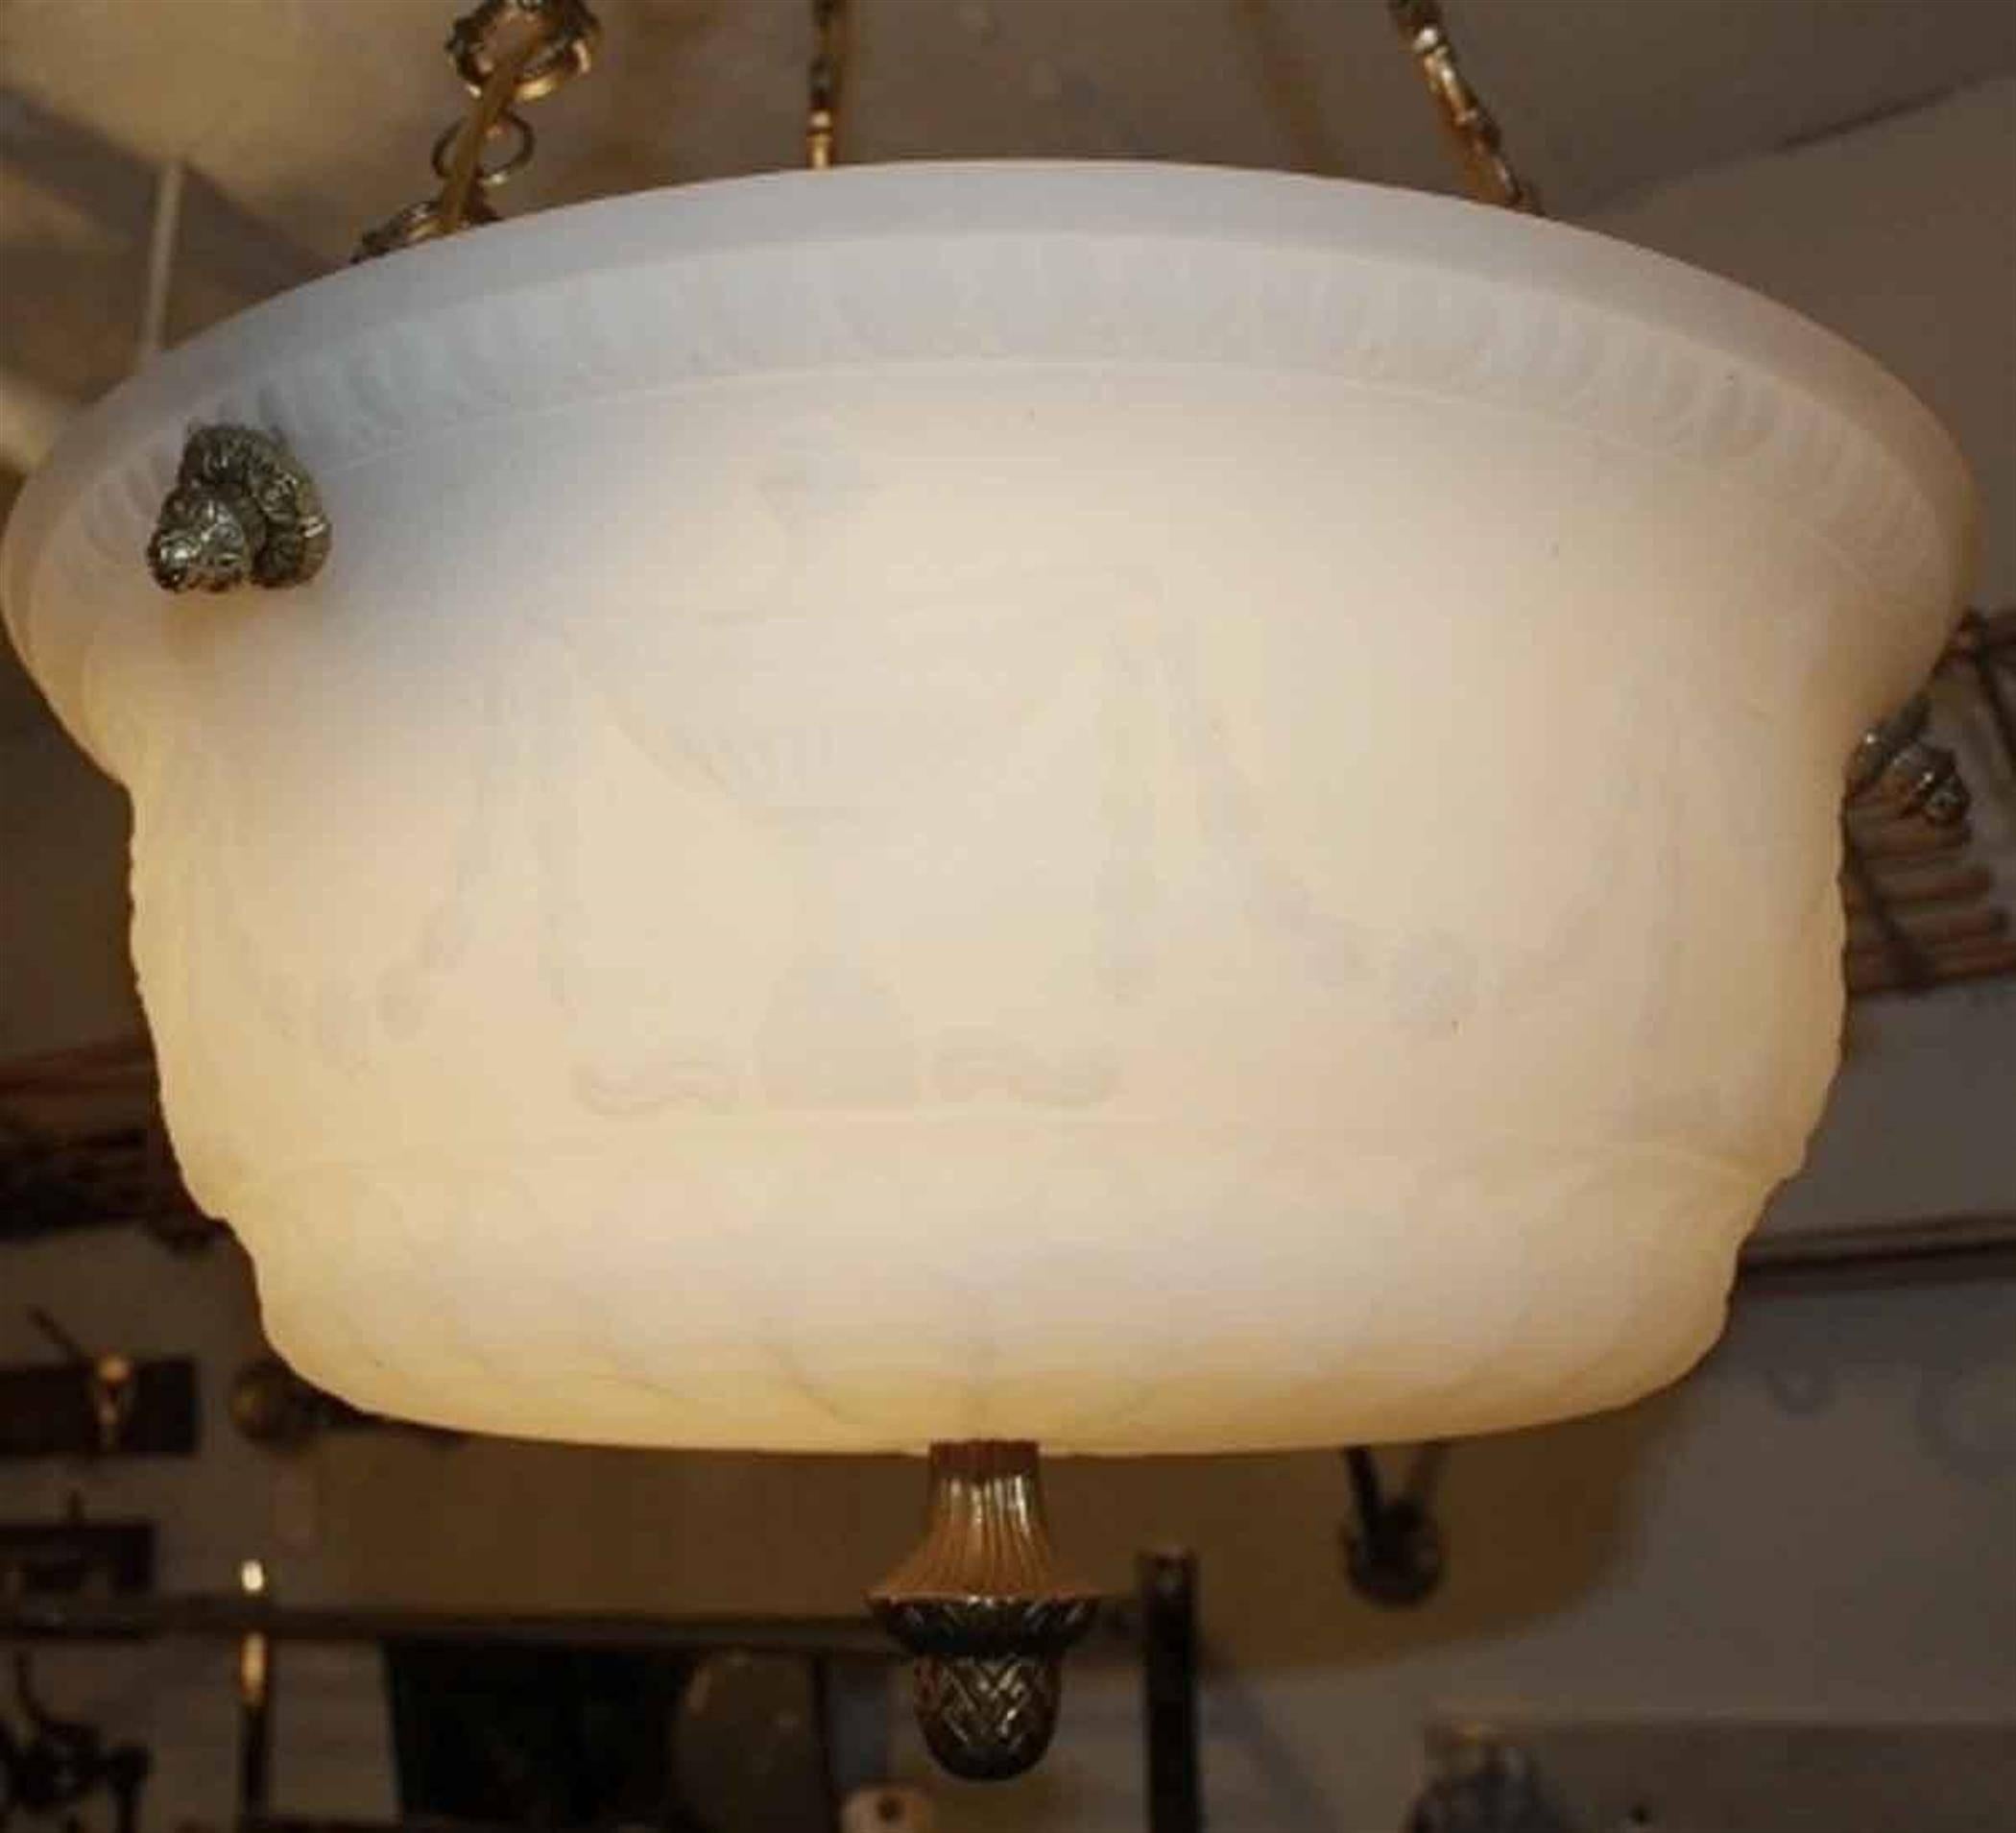 Decorative 1920s cast milk glass pendant light with an ornate brass canopy and chain. This can be seen at our 2420 Broadway location on the upper west side in Manhattan.